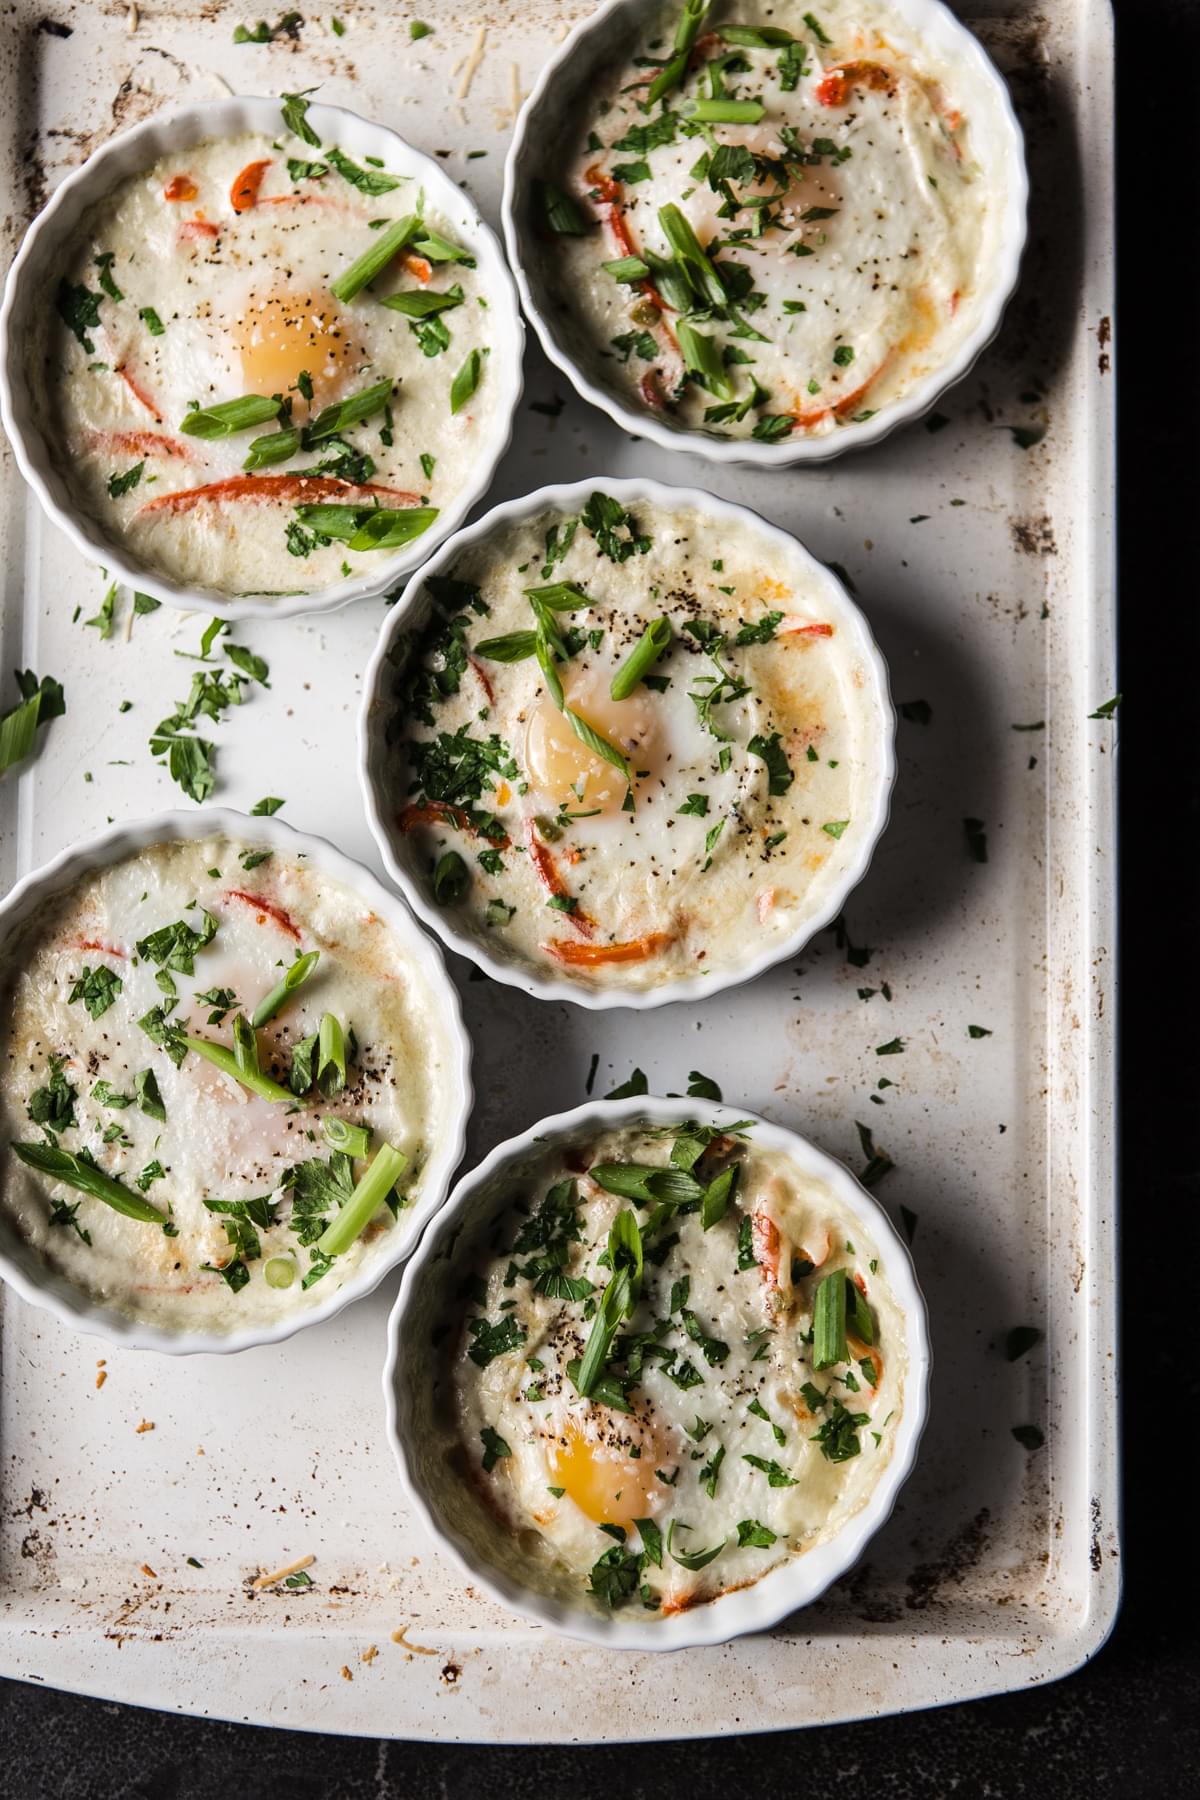 5 ramekins with eggs baked in cream with red bell peppers and leeks